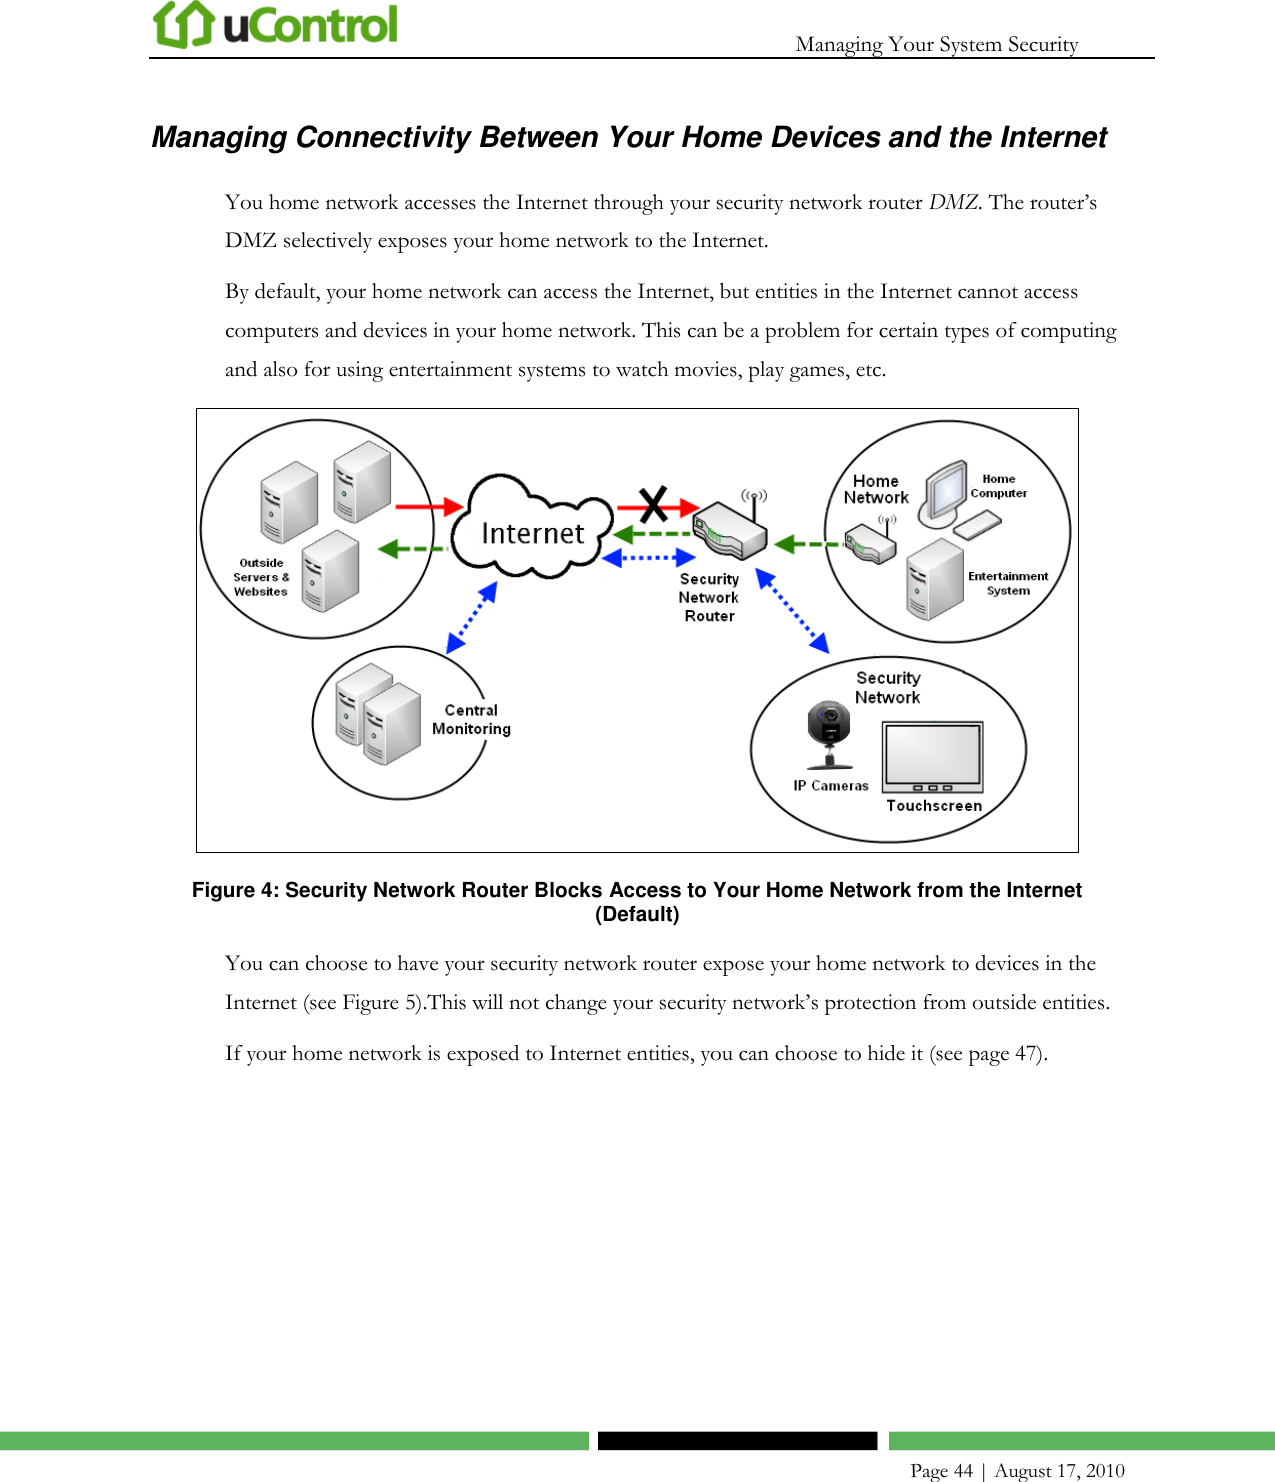   Managing Your System Security    Page 44 | August 17, 2010 Managing Connectivity Between Your Home Devices and the Internet You home network accesses the Internet through your security network router DMZ. The router’s DMZ selectively exposes your home network to the Internet.  By default, your home network can access the Internet, but entities in the Internet cannot access computers and devices in your home network. This can be a problem for certain types of computing and also for using entertainment systems to watch movies, play games, etc.   Figure 4: Security Network Router Blocks Access to Your Home Network from the Internet (Default) You can choose to have your security network router expose your home network to devices in the Internet (see Figure 5).This will not change your security network’s protection from outside entities. If your home network is exposed to Internet entities, you can choose to hide it (see page 47). 